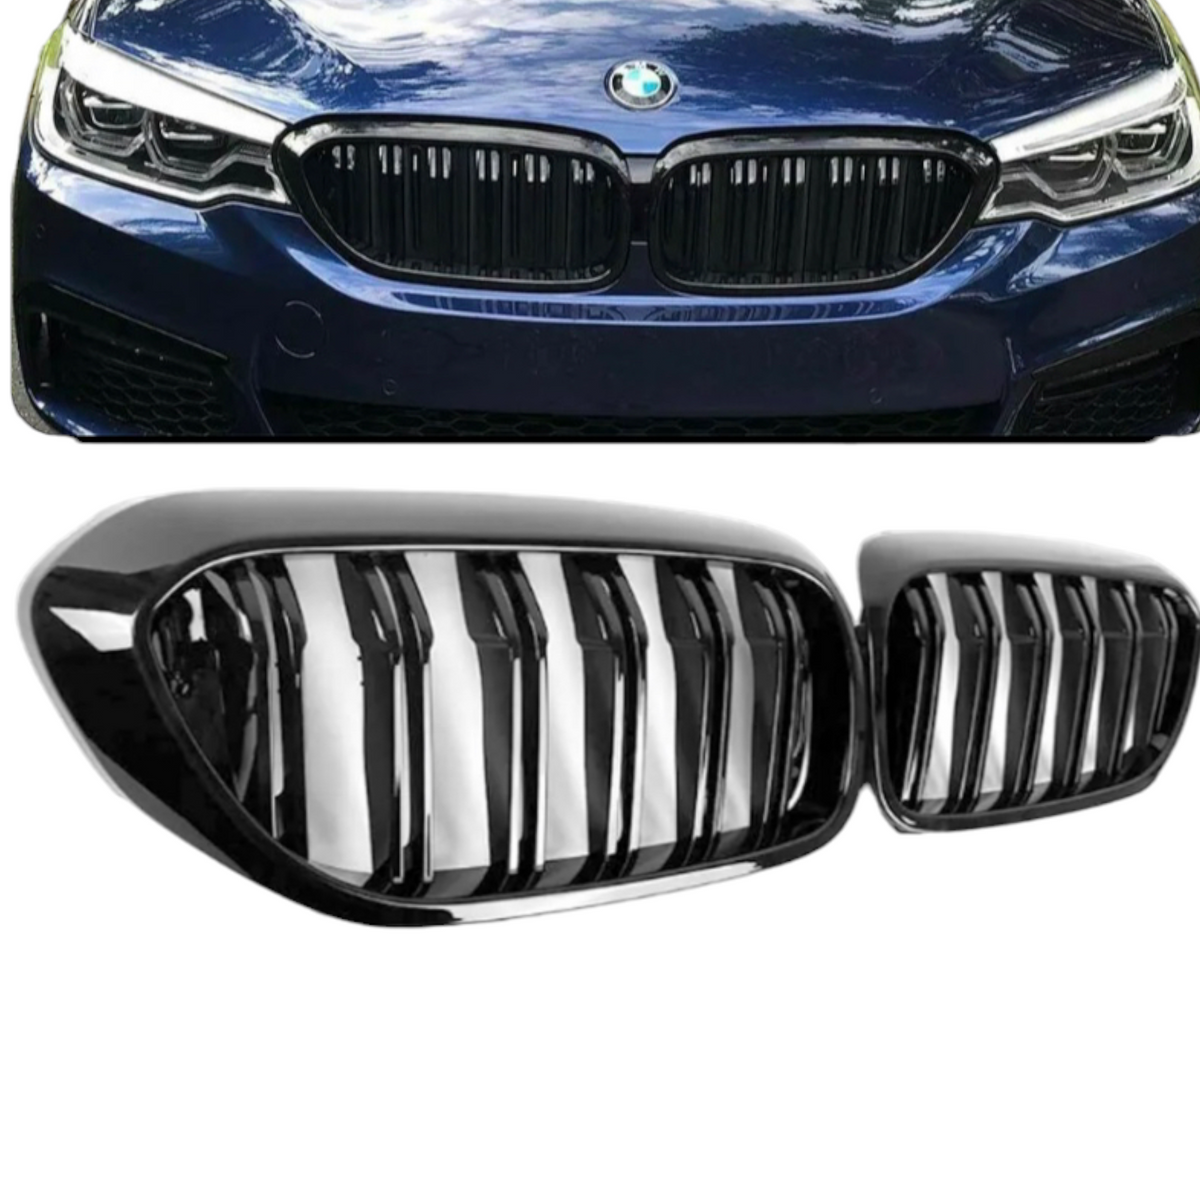 Front Grilles - Double Slat - Fits BMW G30 G31 2017-2018 - 5 Series - Gloss Black